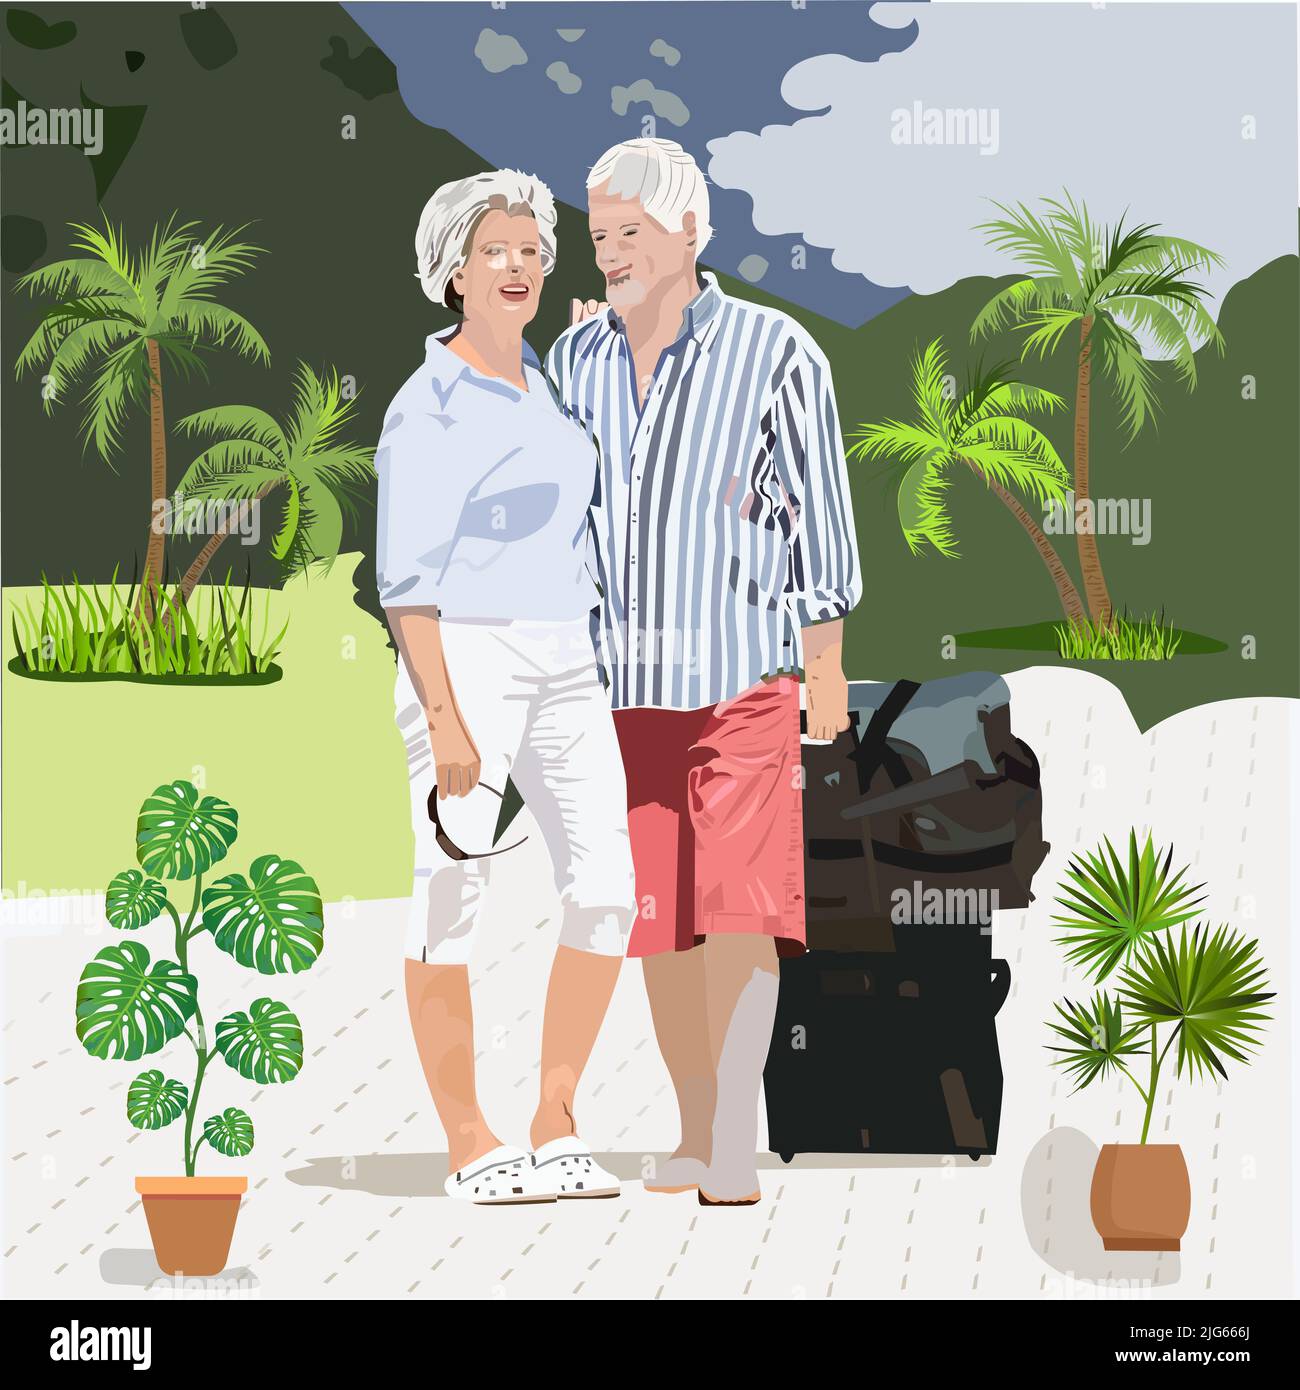 Illustration of an Elderly Couple Traveling Together with Luggage Stock Vector